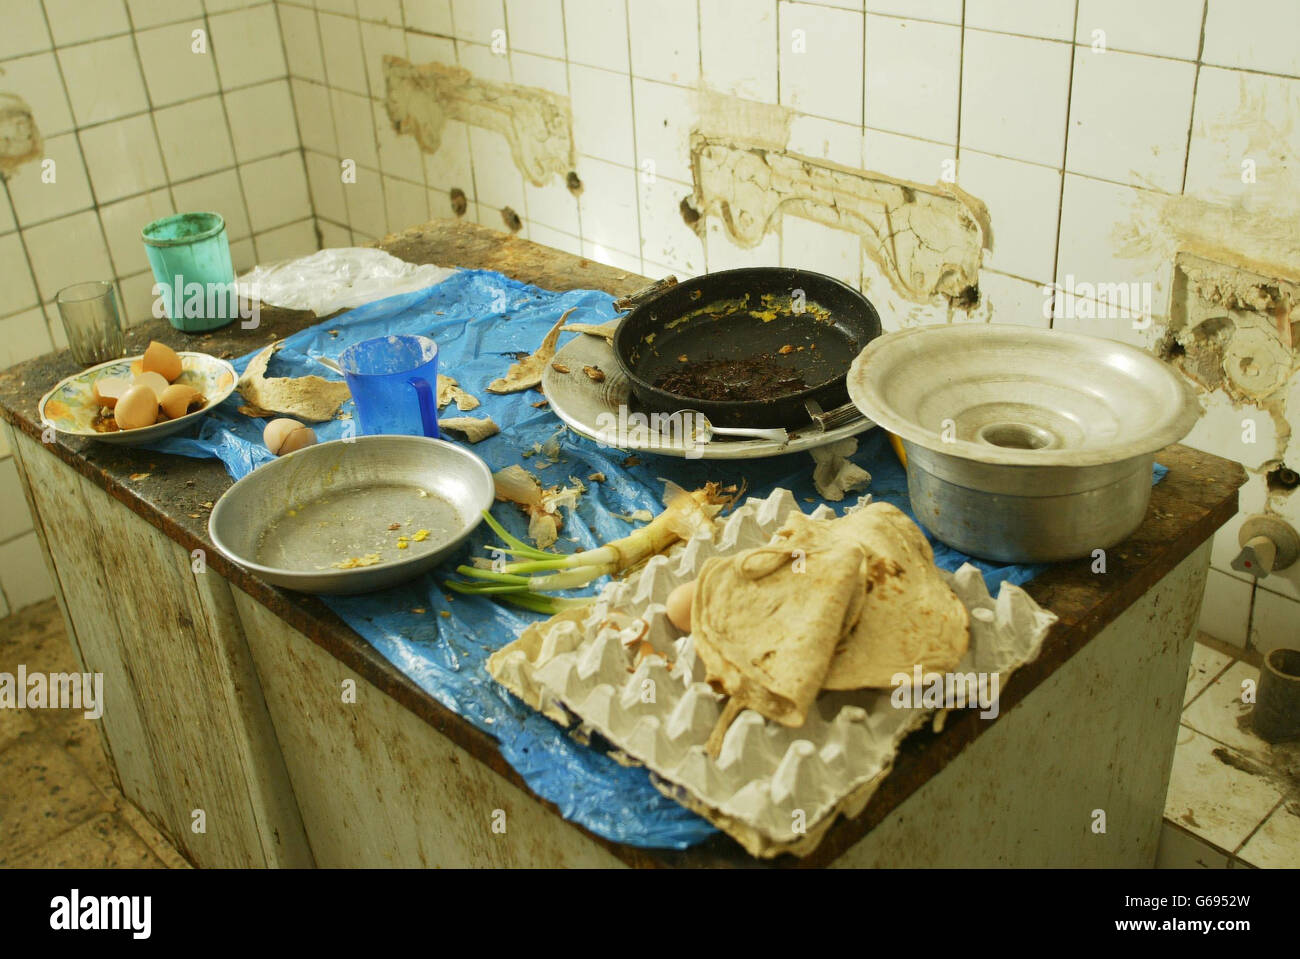 British Forces in Iraq. Food left behind by Iraqi forces in an interrogation centre in Abu Al Khasib. Stock Photo